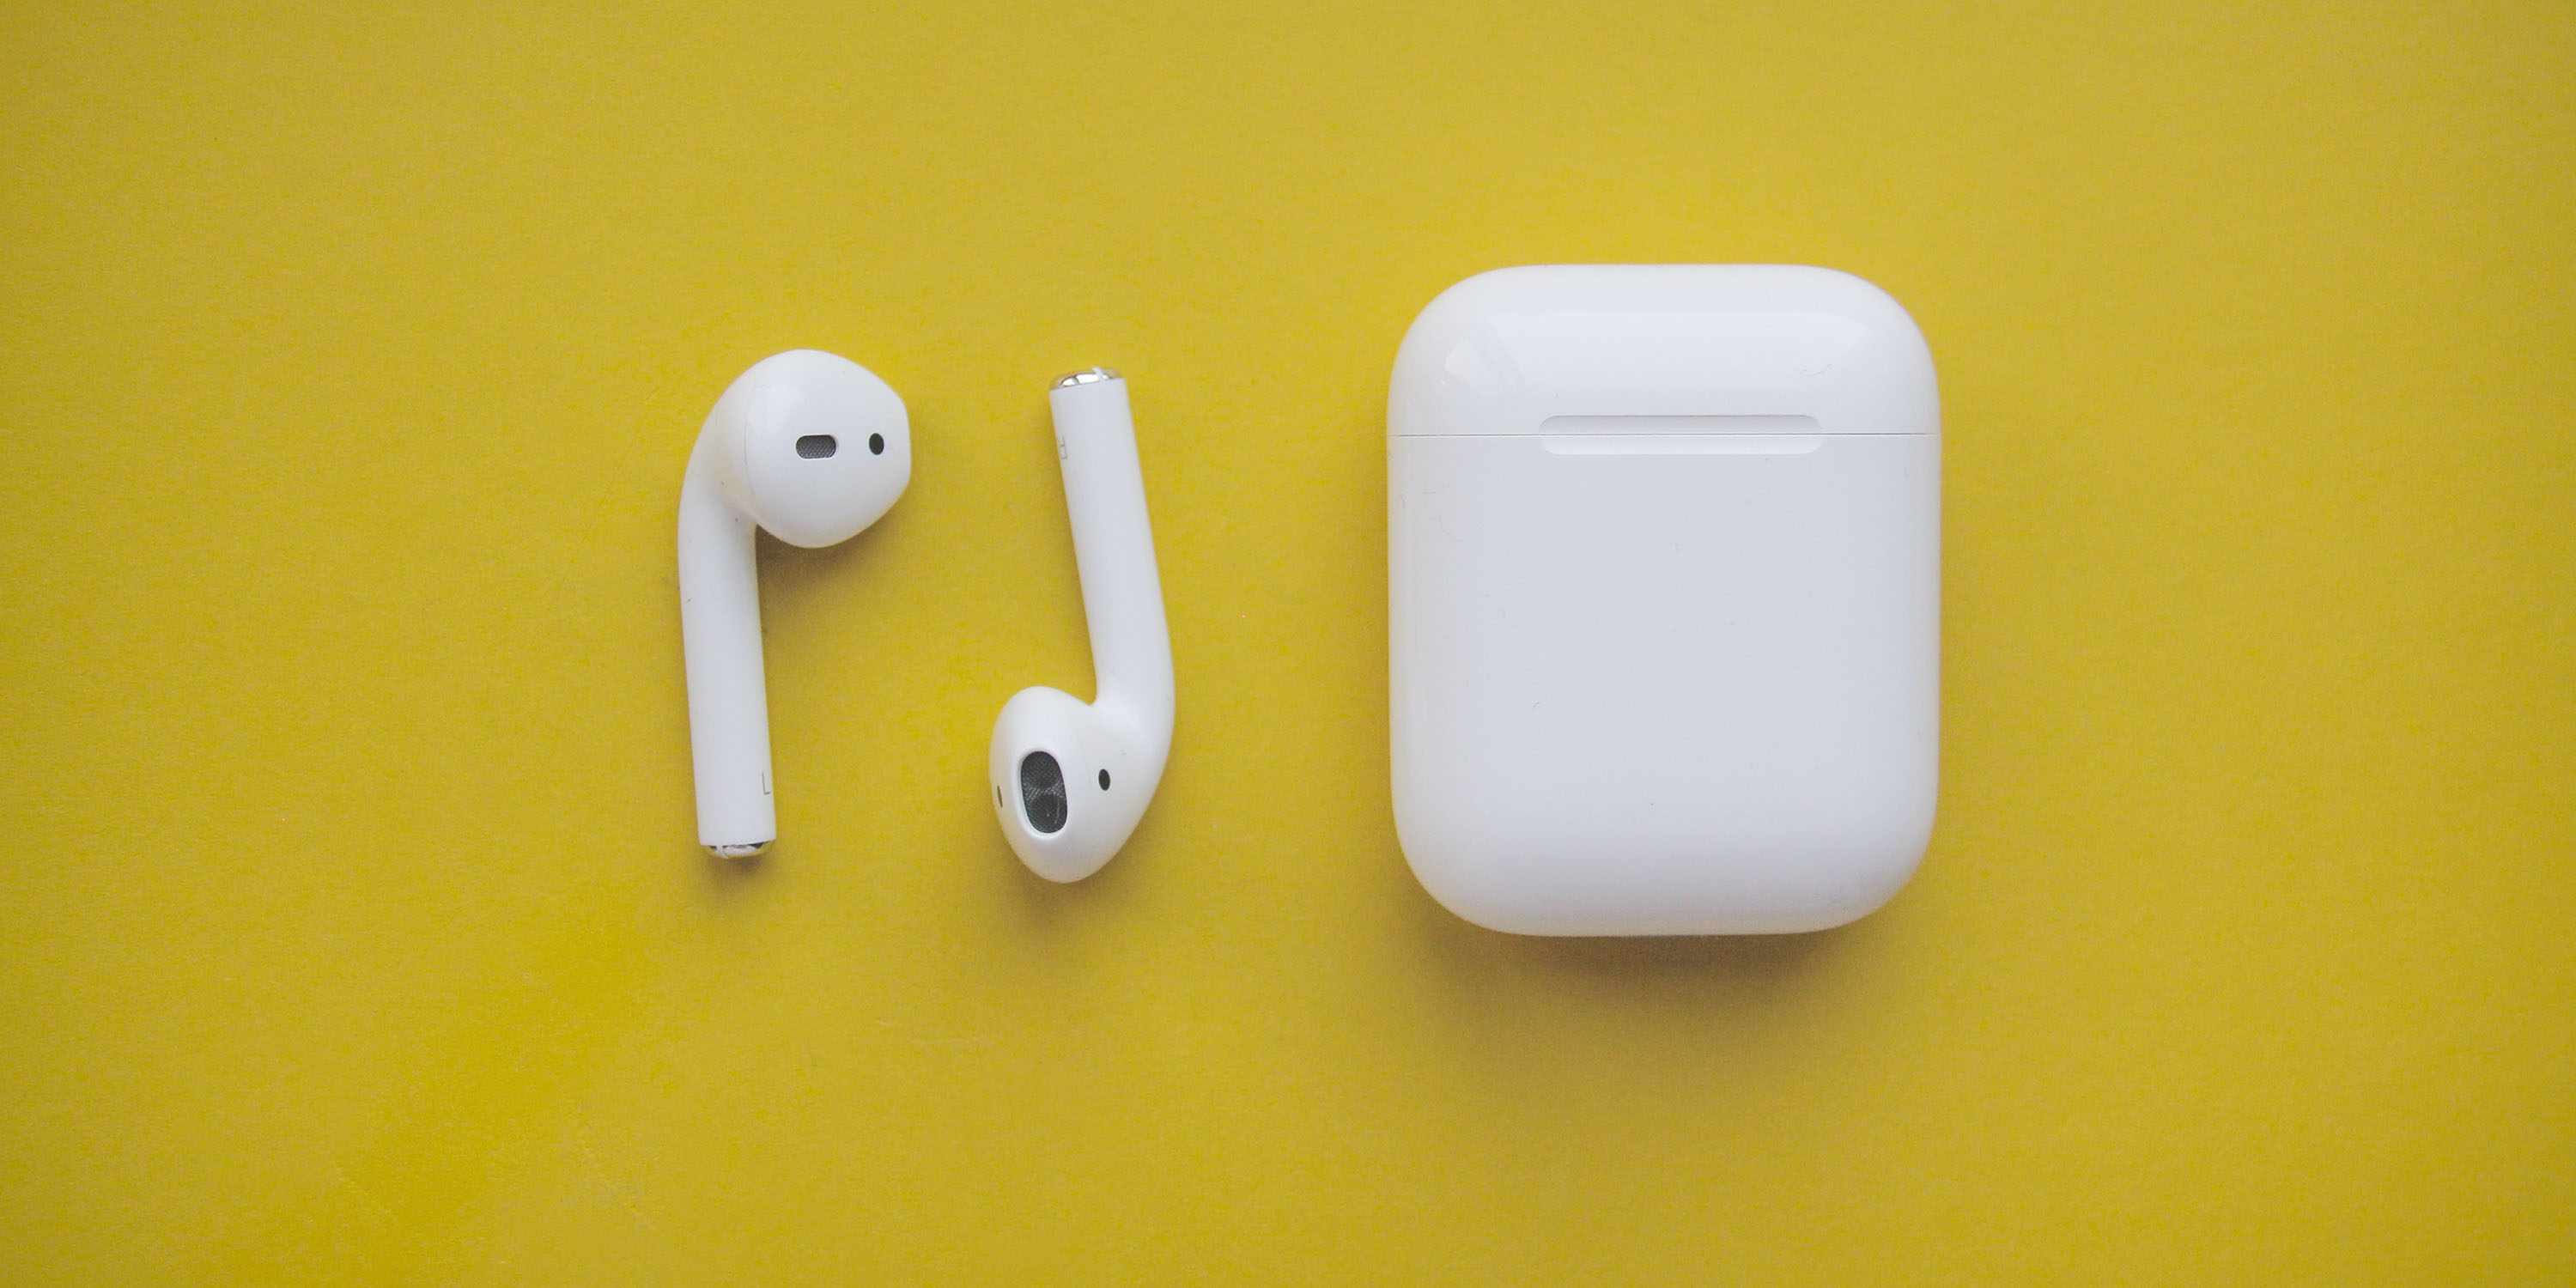 Tegne Uensartet Sportsmand Fake AirPods cost Apple $3.2B this year, says report on seizures - 9to5Mac